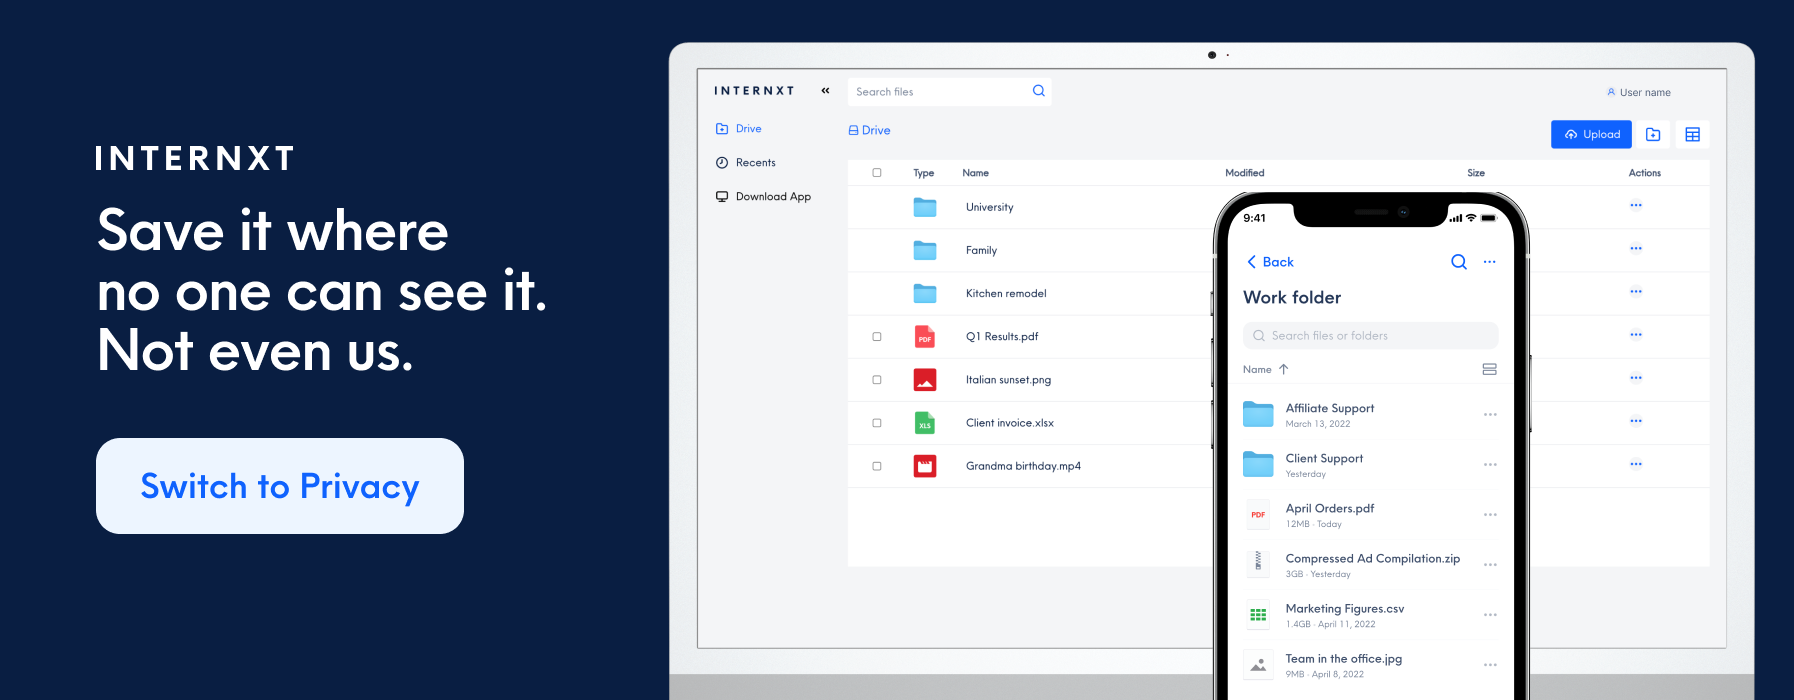 Internxt is a cloud storage service based on privacy